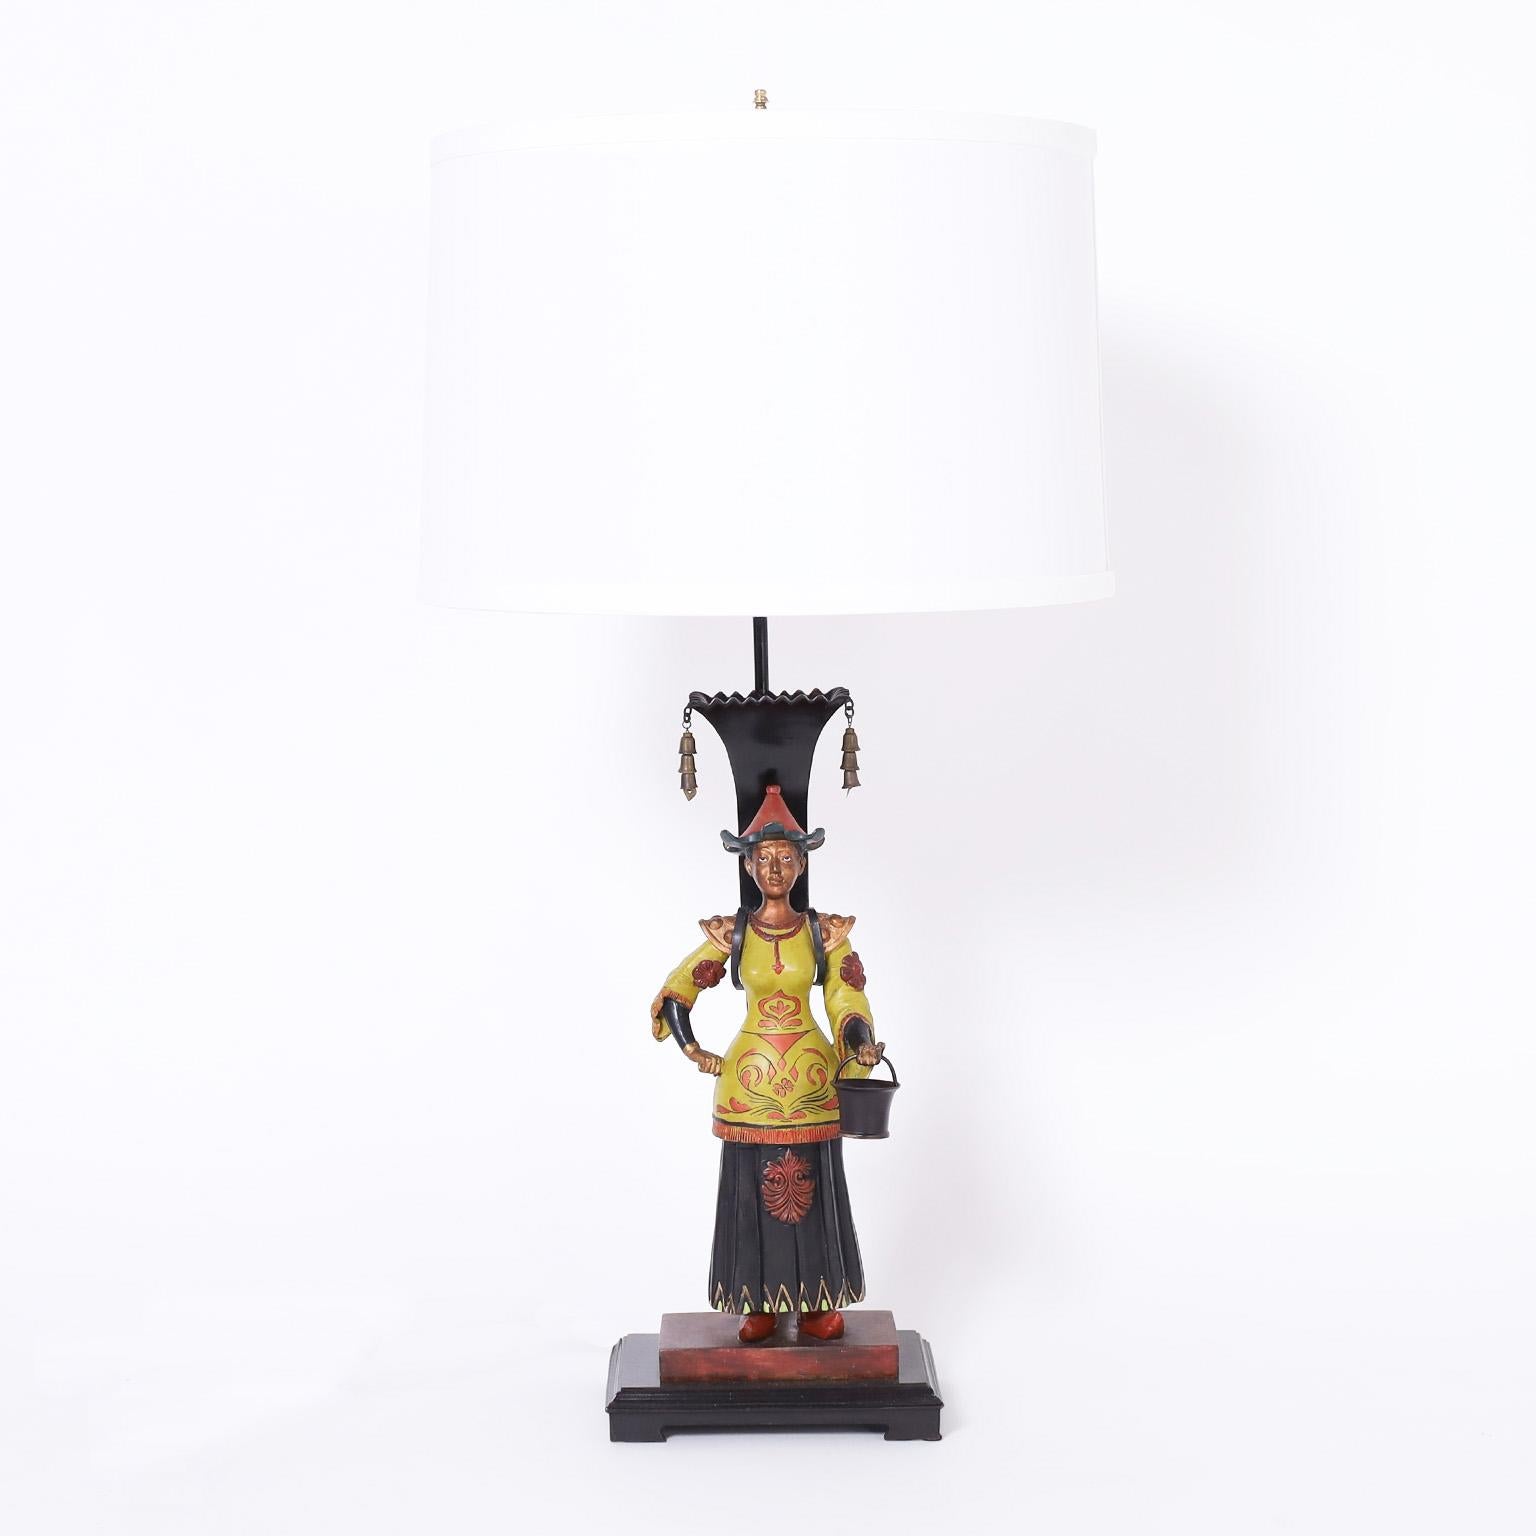 Transporting pair of chinoiserie table lamps by Jeanne Reed's LTD, crafted in cast bronze and painted, depicting Asian figures of a man and woman.